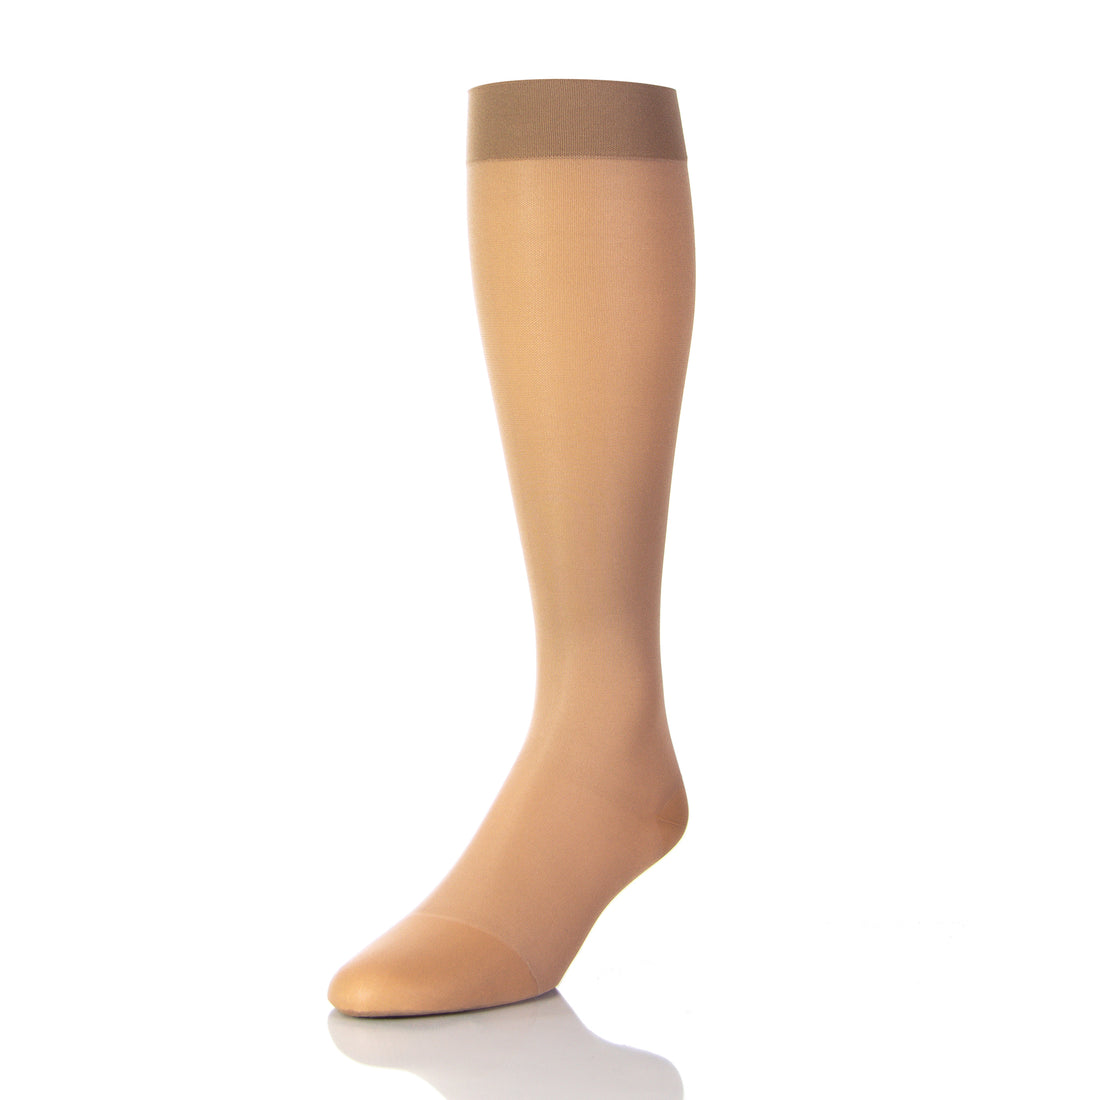 Compression Stockings For Varicose Veins